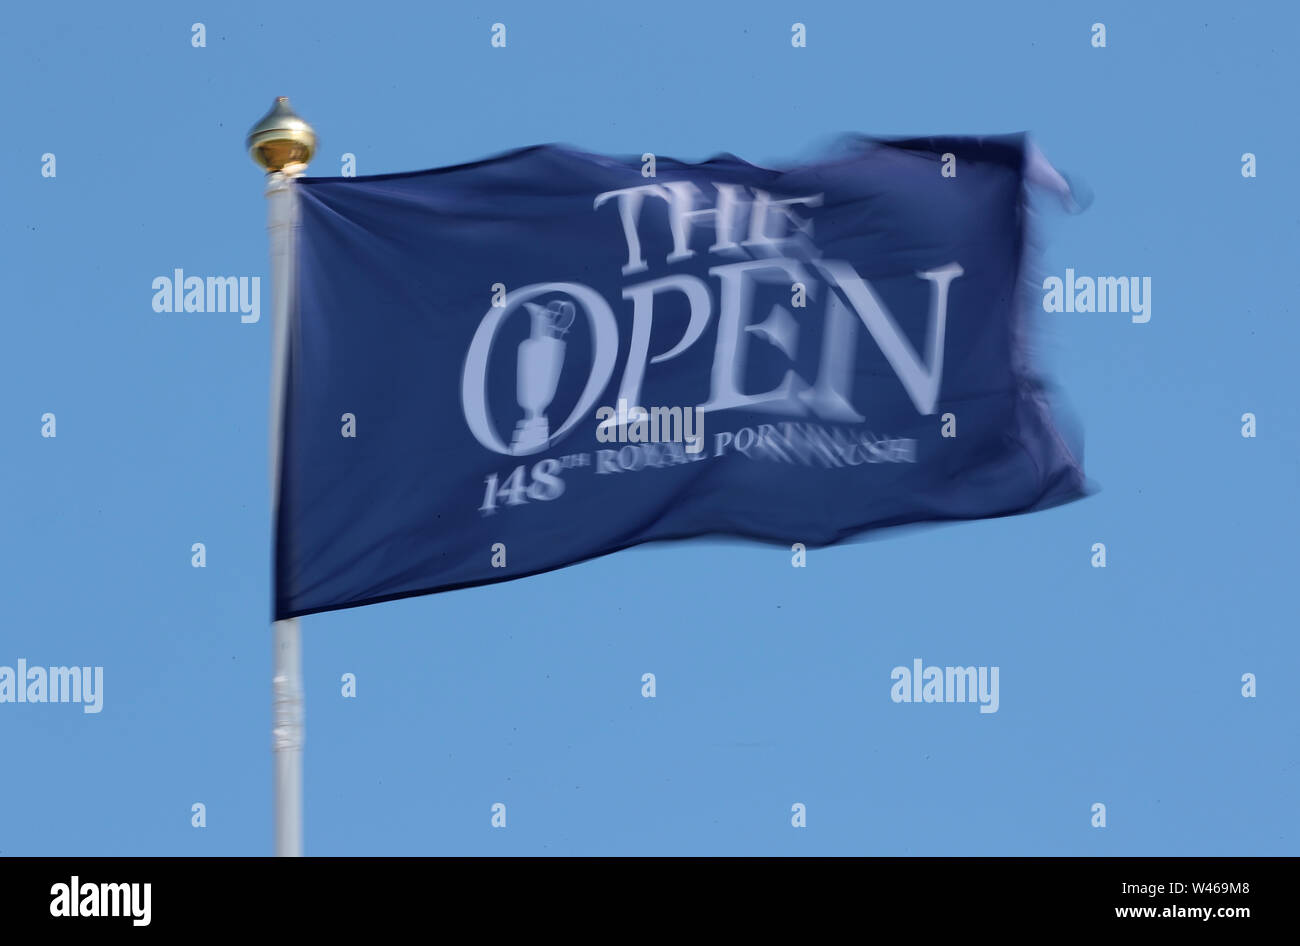 A The Open flag blows in the wind during day three of The Open Championship 2019 at Royal Portrush Golf Club. Stock Photo